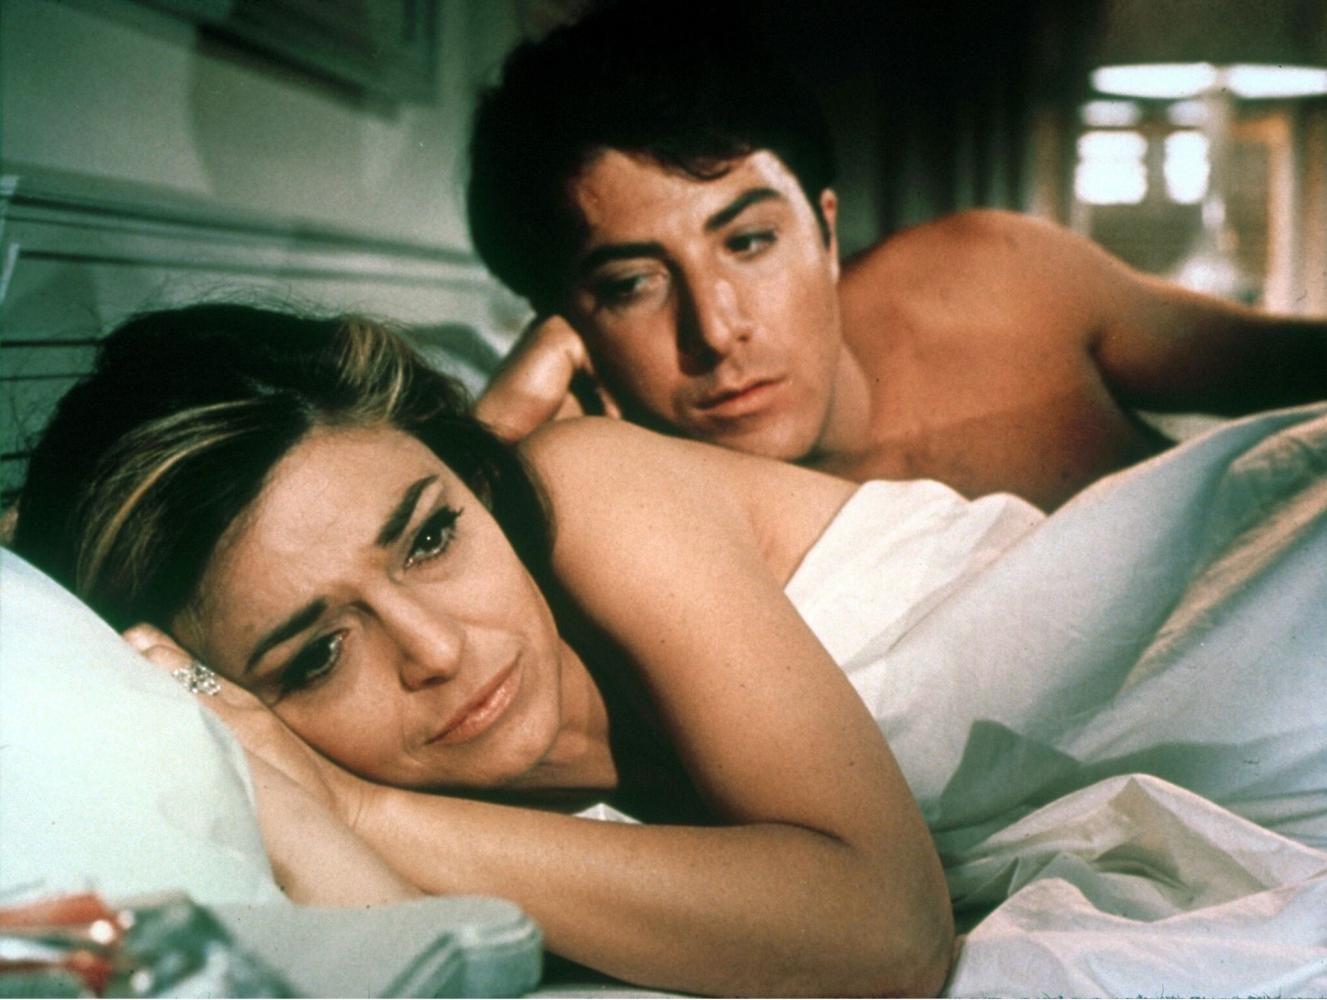 Anne Bancroft and Dustin Hoffman star in the classic film interpretation of Charles Webb’s novel, “The Graduate.” The 50th anniversary 4K restoration of the film premiered on Sunday.